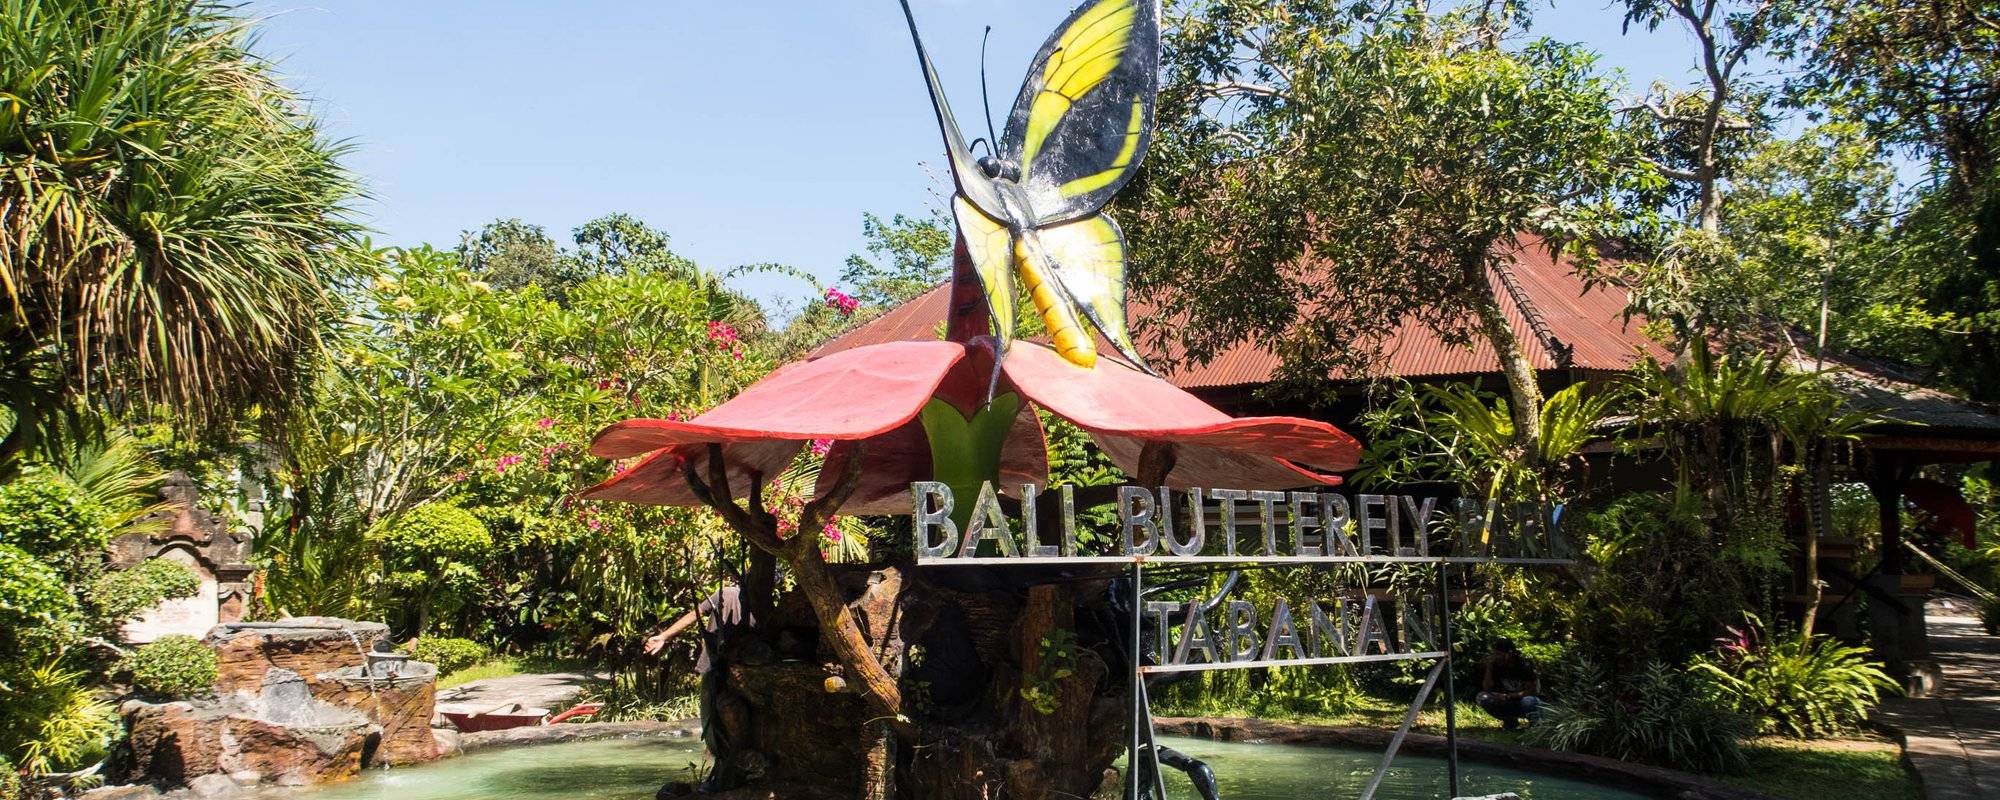 Visiting Butterfly Park in Tabanan Bali, Indonesia